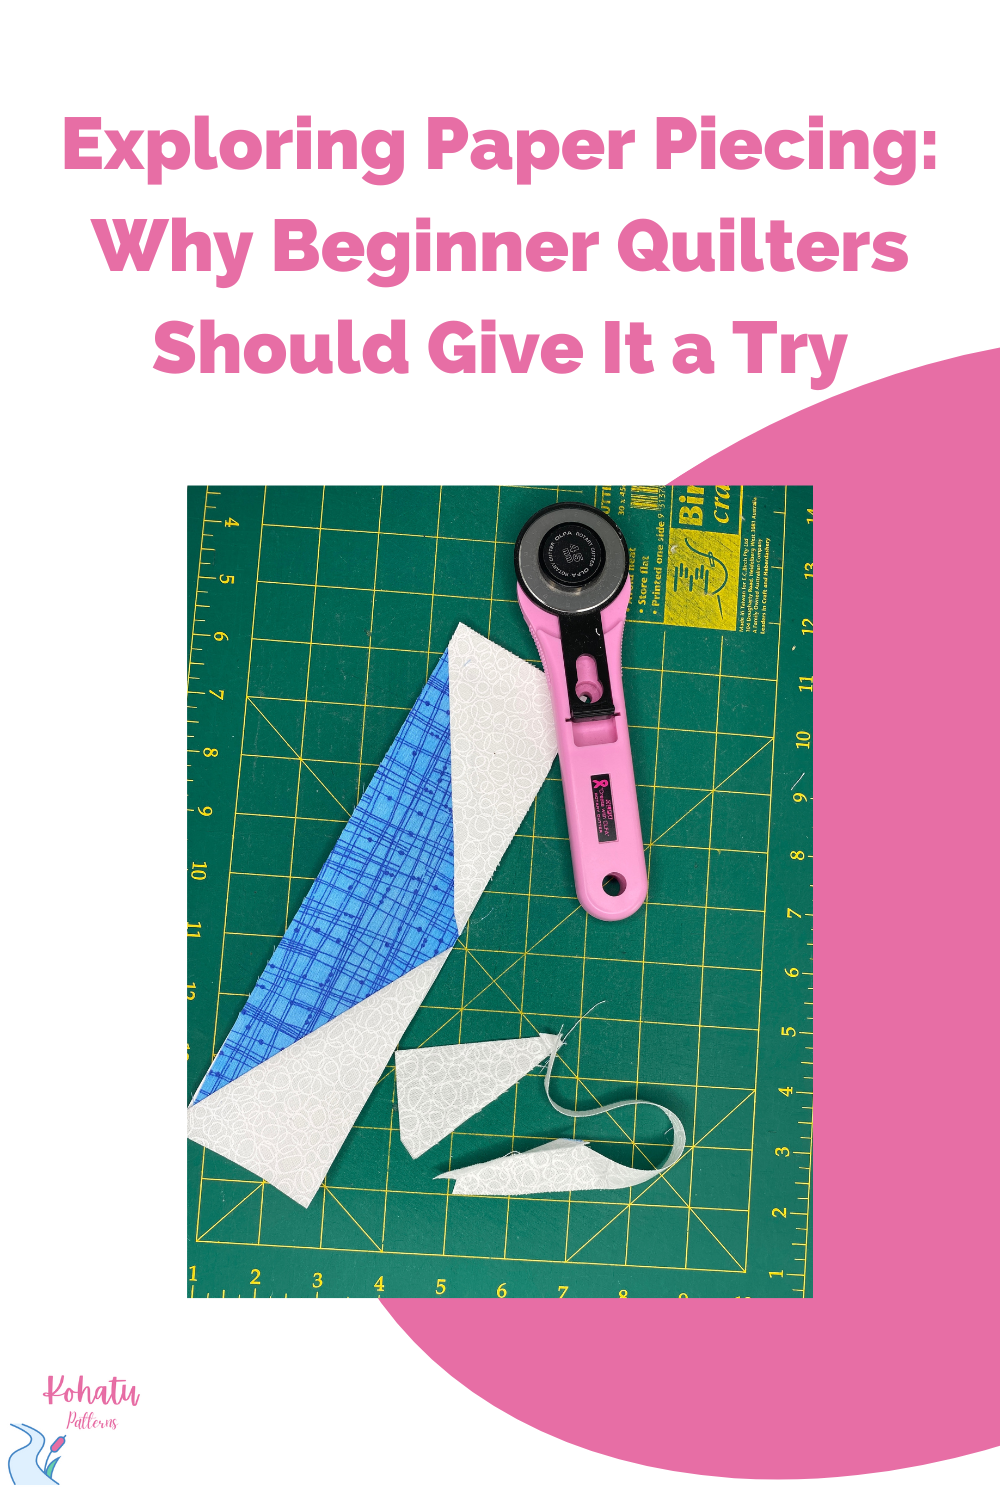 If you are learning to quilt and want to make a fun quilt, paper piecing might be the best method to try as a beginner!